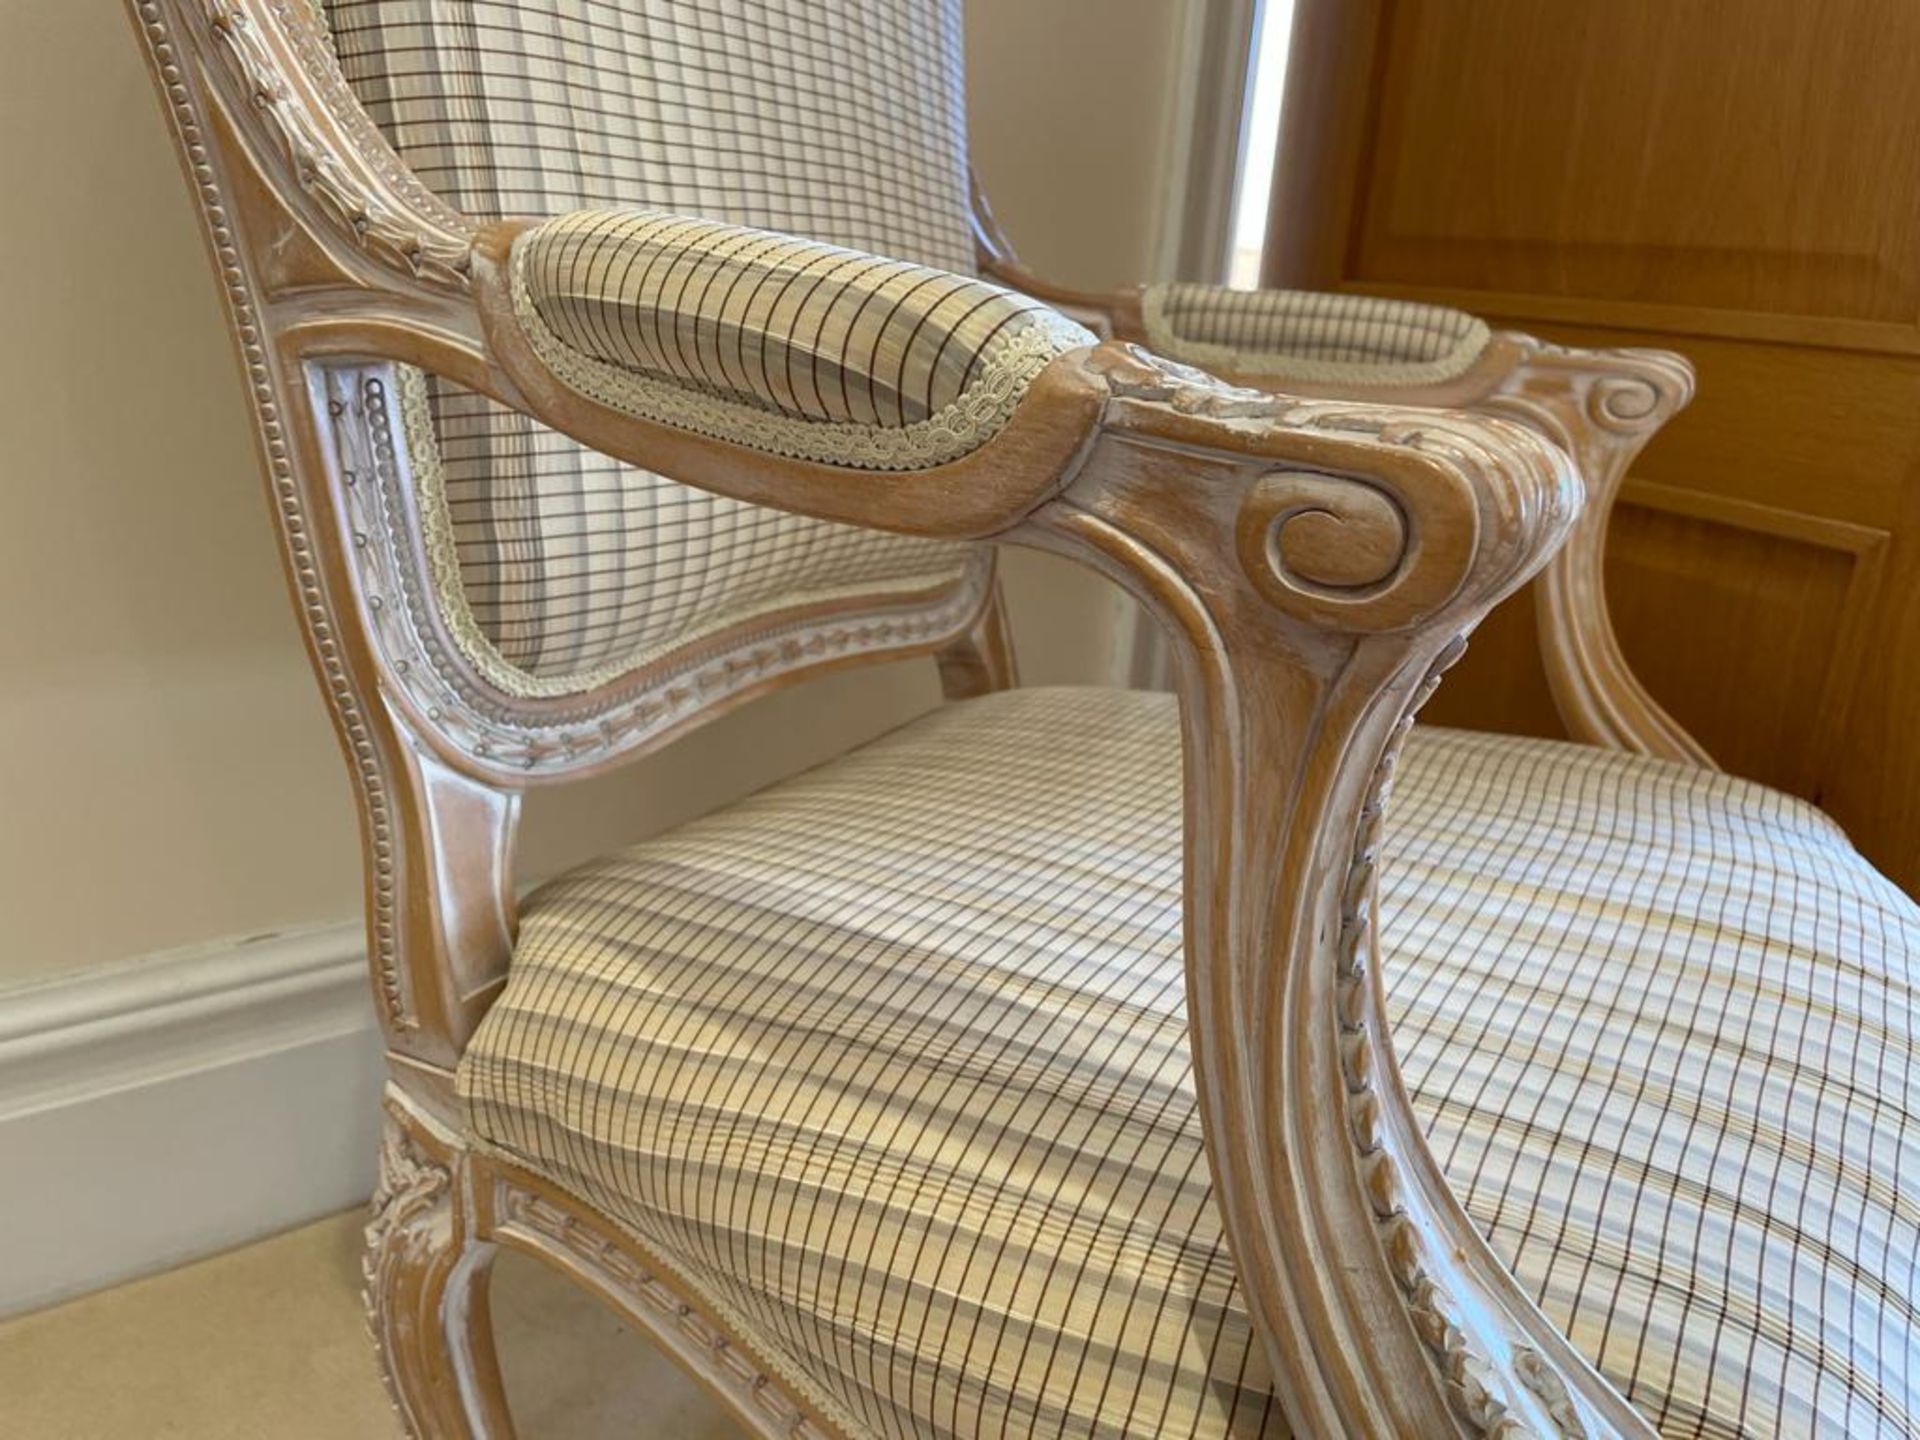 Pair of French Shabby Chic Bedroom Chairs - Stunning Carved Wood Chair Upholstered With Striped - Image 13 of 16